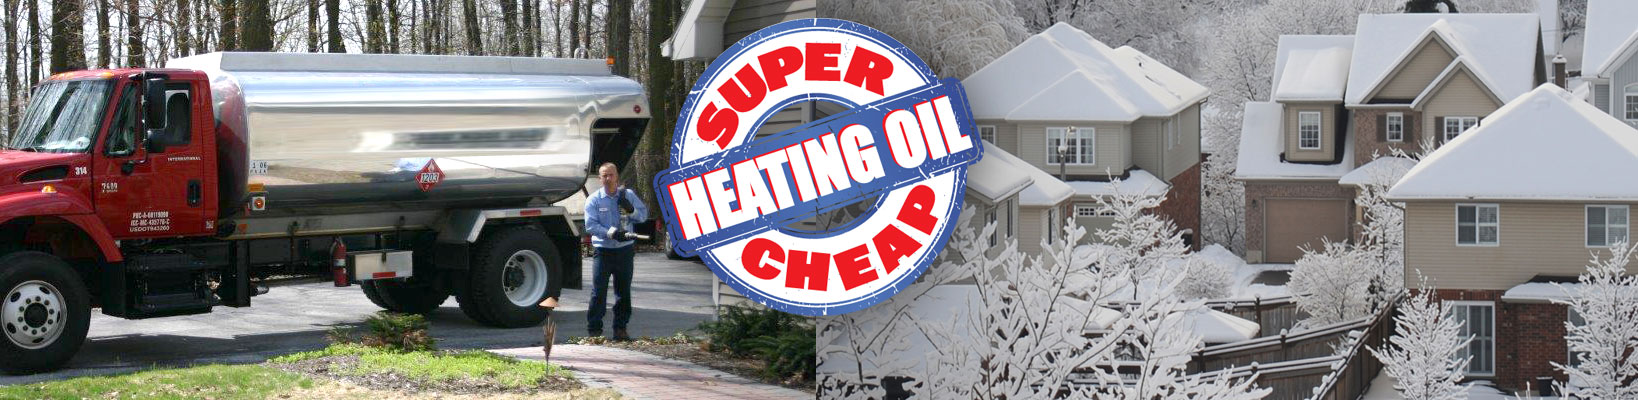 Super Cheap heating Oil Terms of Use